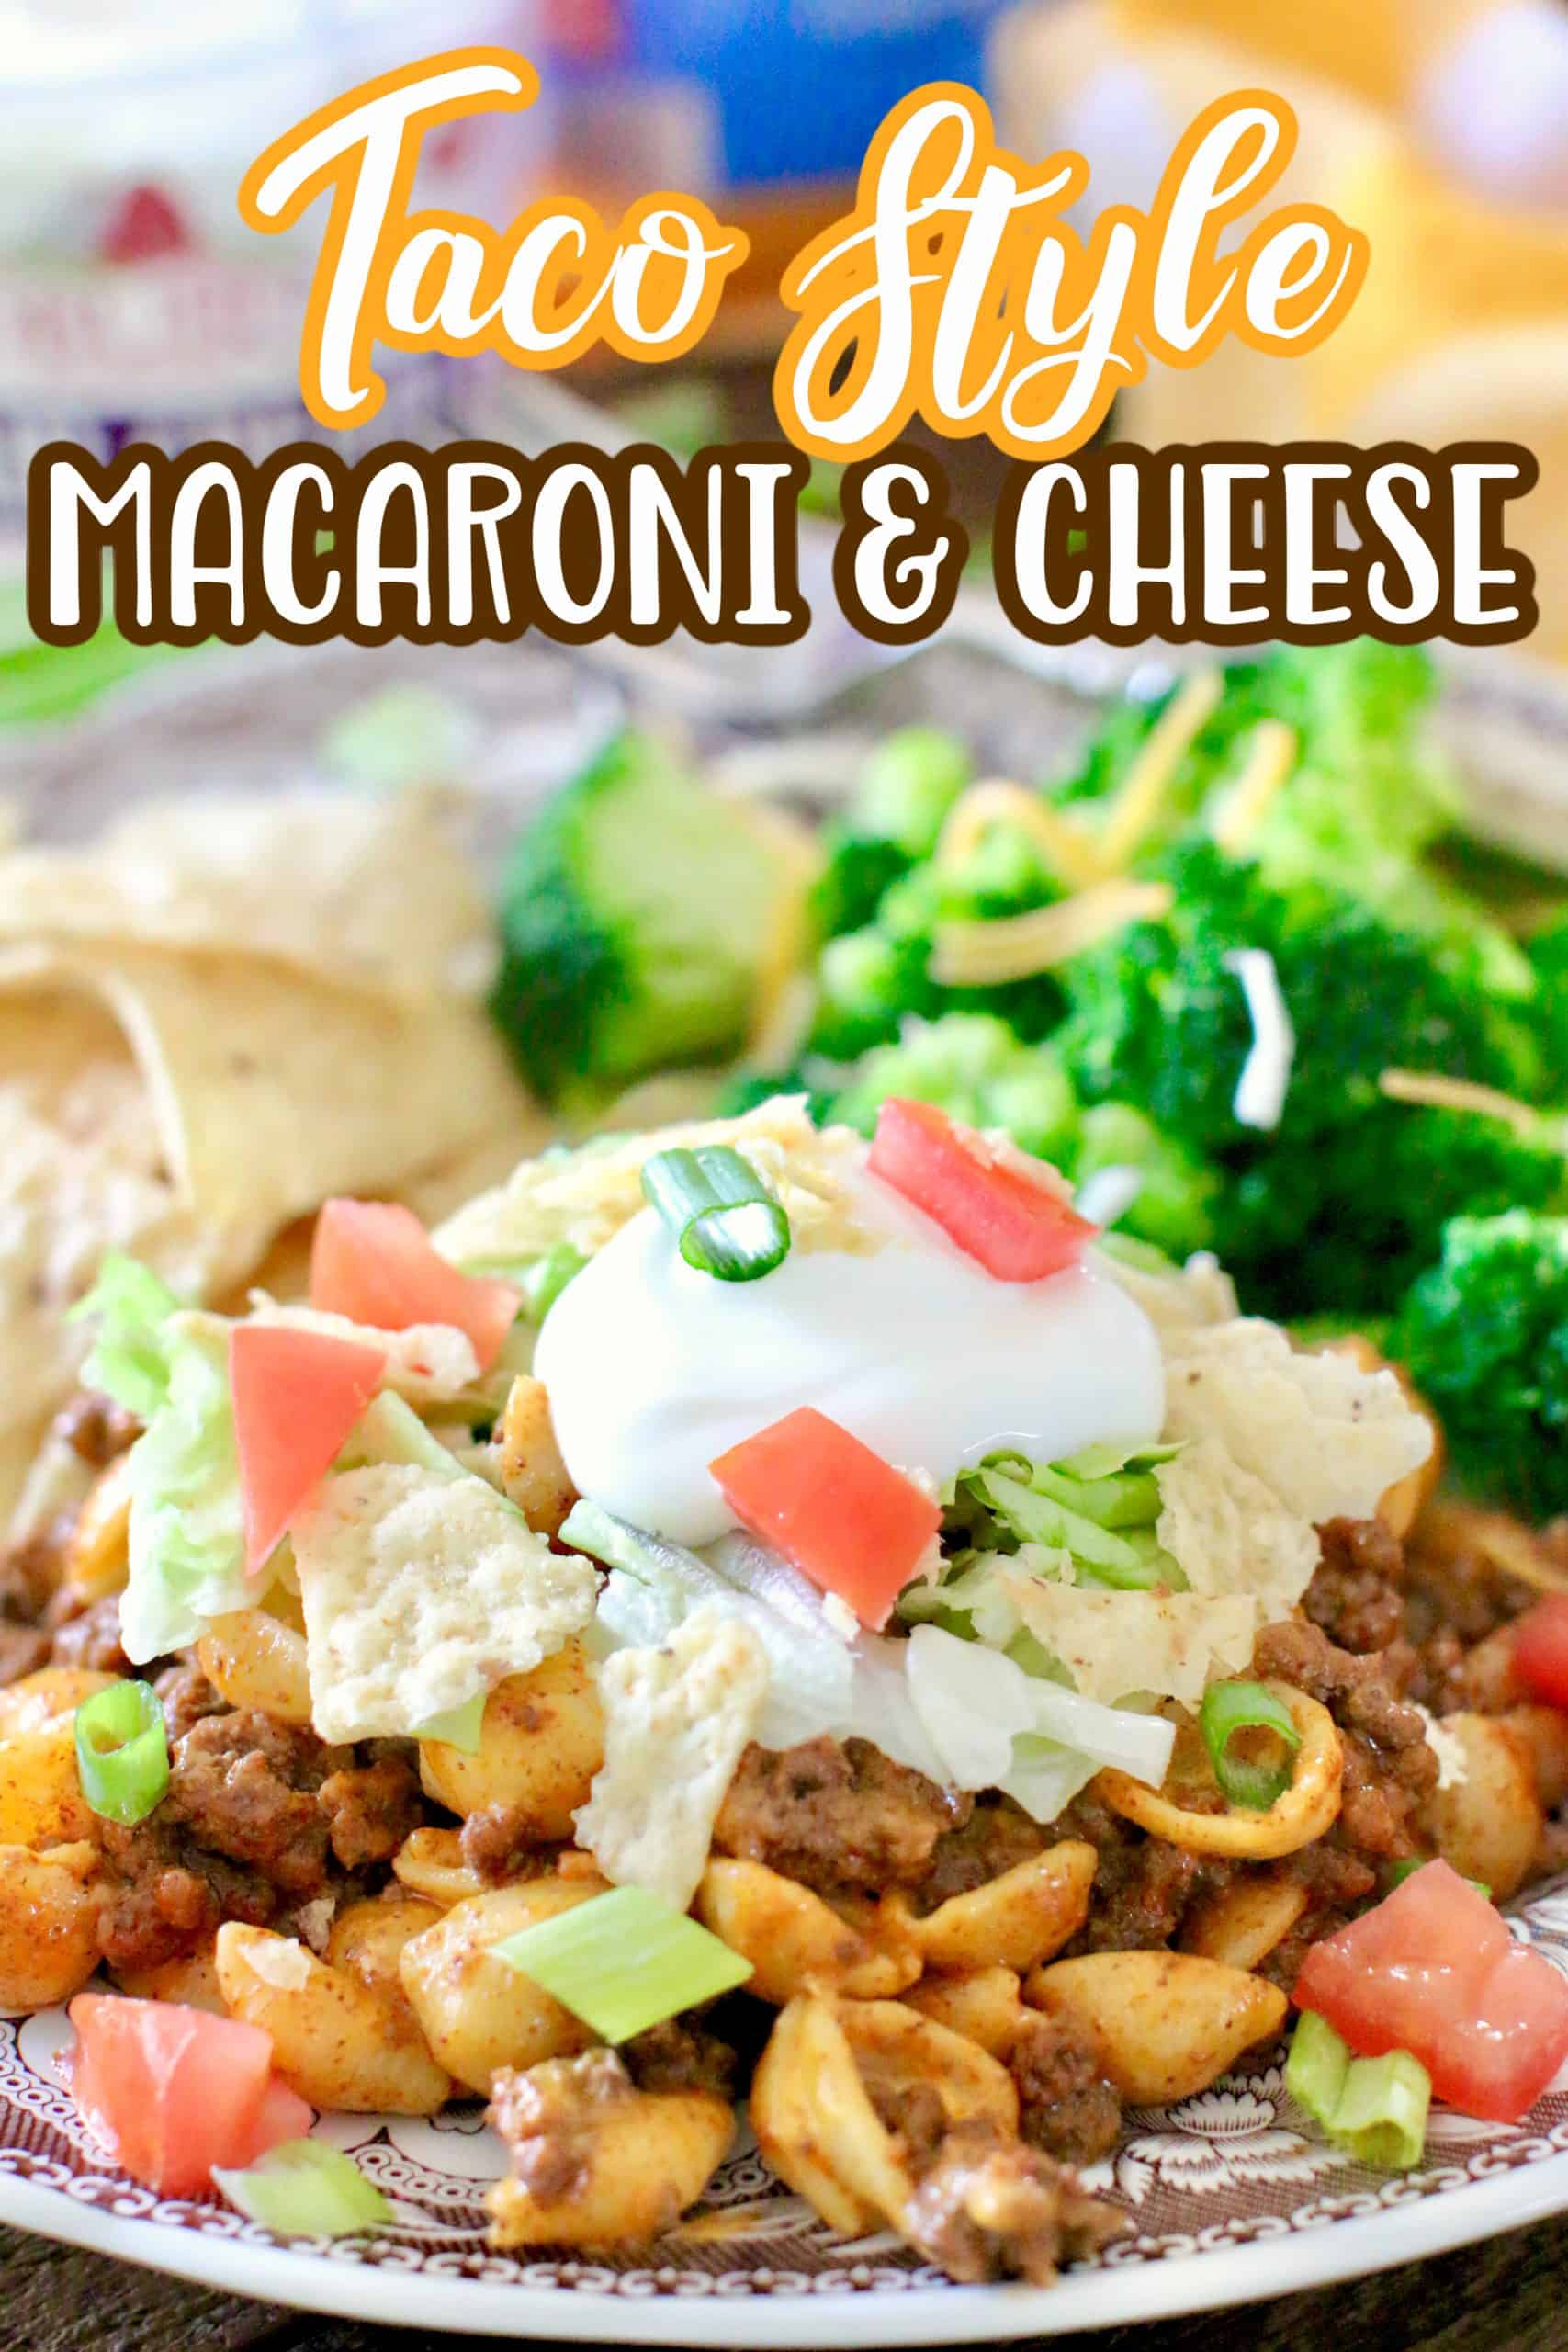 Easy Taco Macaroni and Cheese recipe shown served on a plate with steamed broccoli and tortilla chips.